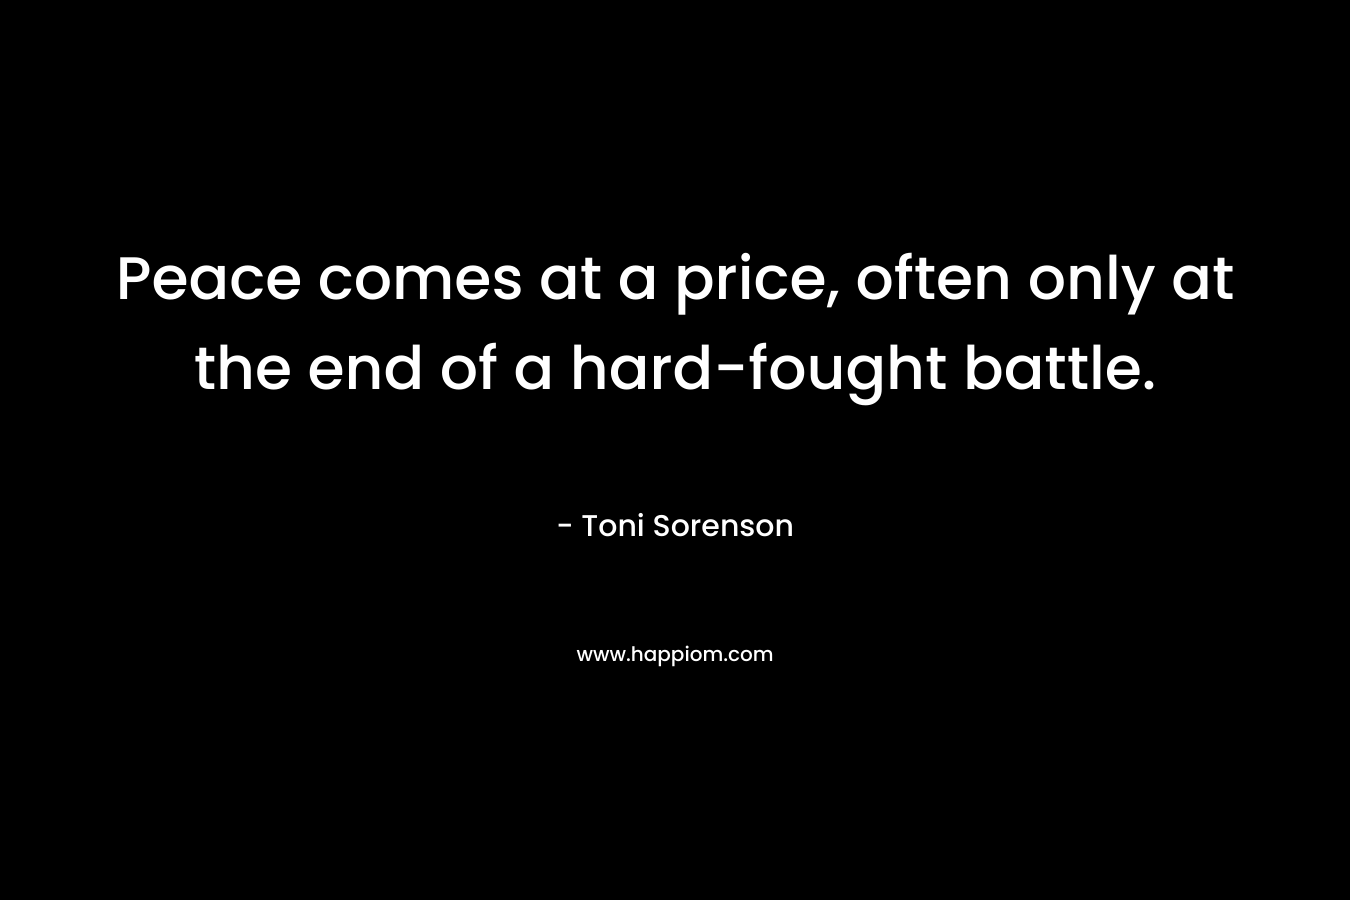 Peace comes at a price, often only at the end of a hard-fought battle. – Toni Sorenson